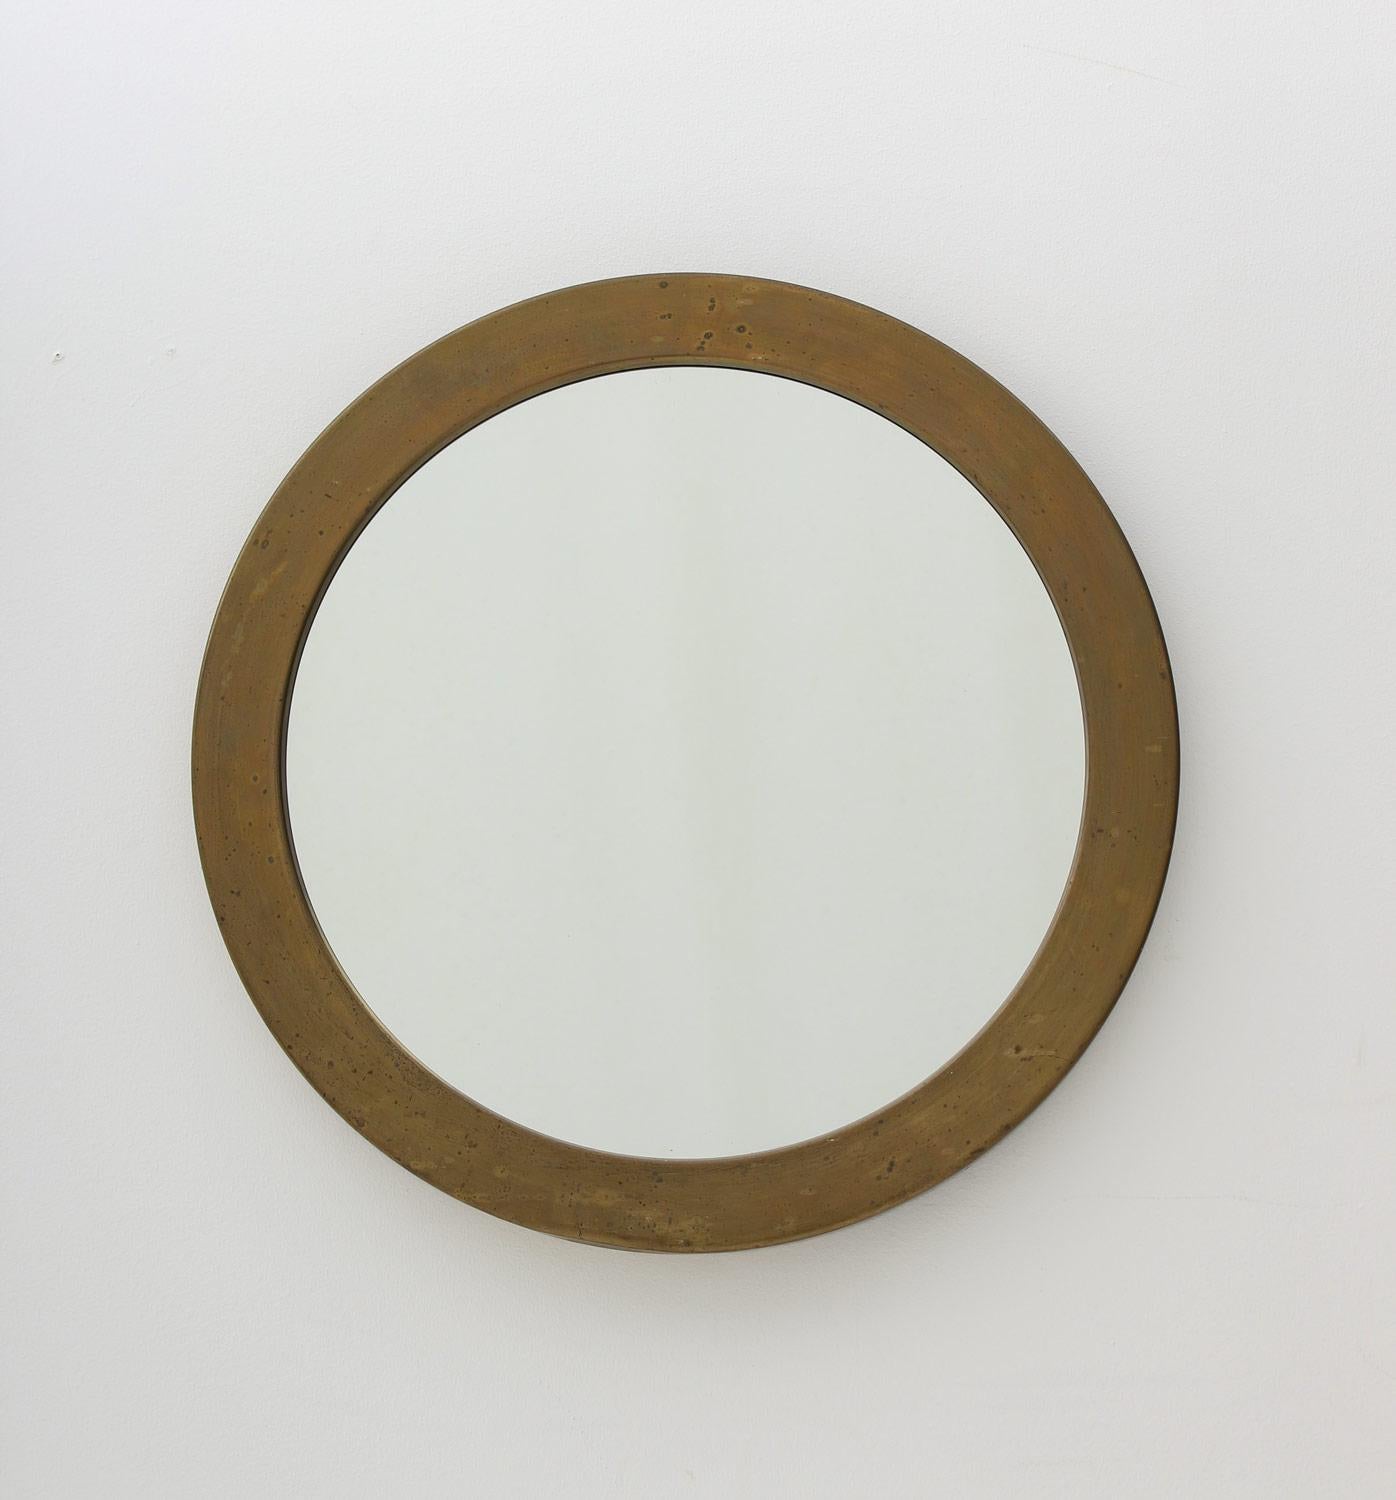 Beautiful round mirror, produced by Glasmäster Markaryd, Sweden. 
Large brass frame with awesome patina. 

Condition: Good original condition. The frame shows a nice warm patina. A dent on the lower part of the frame. Mirror glass in excellent